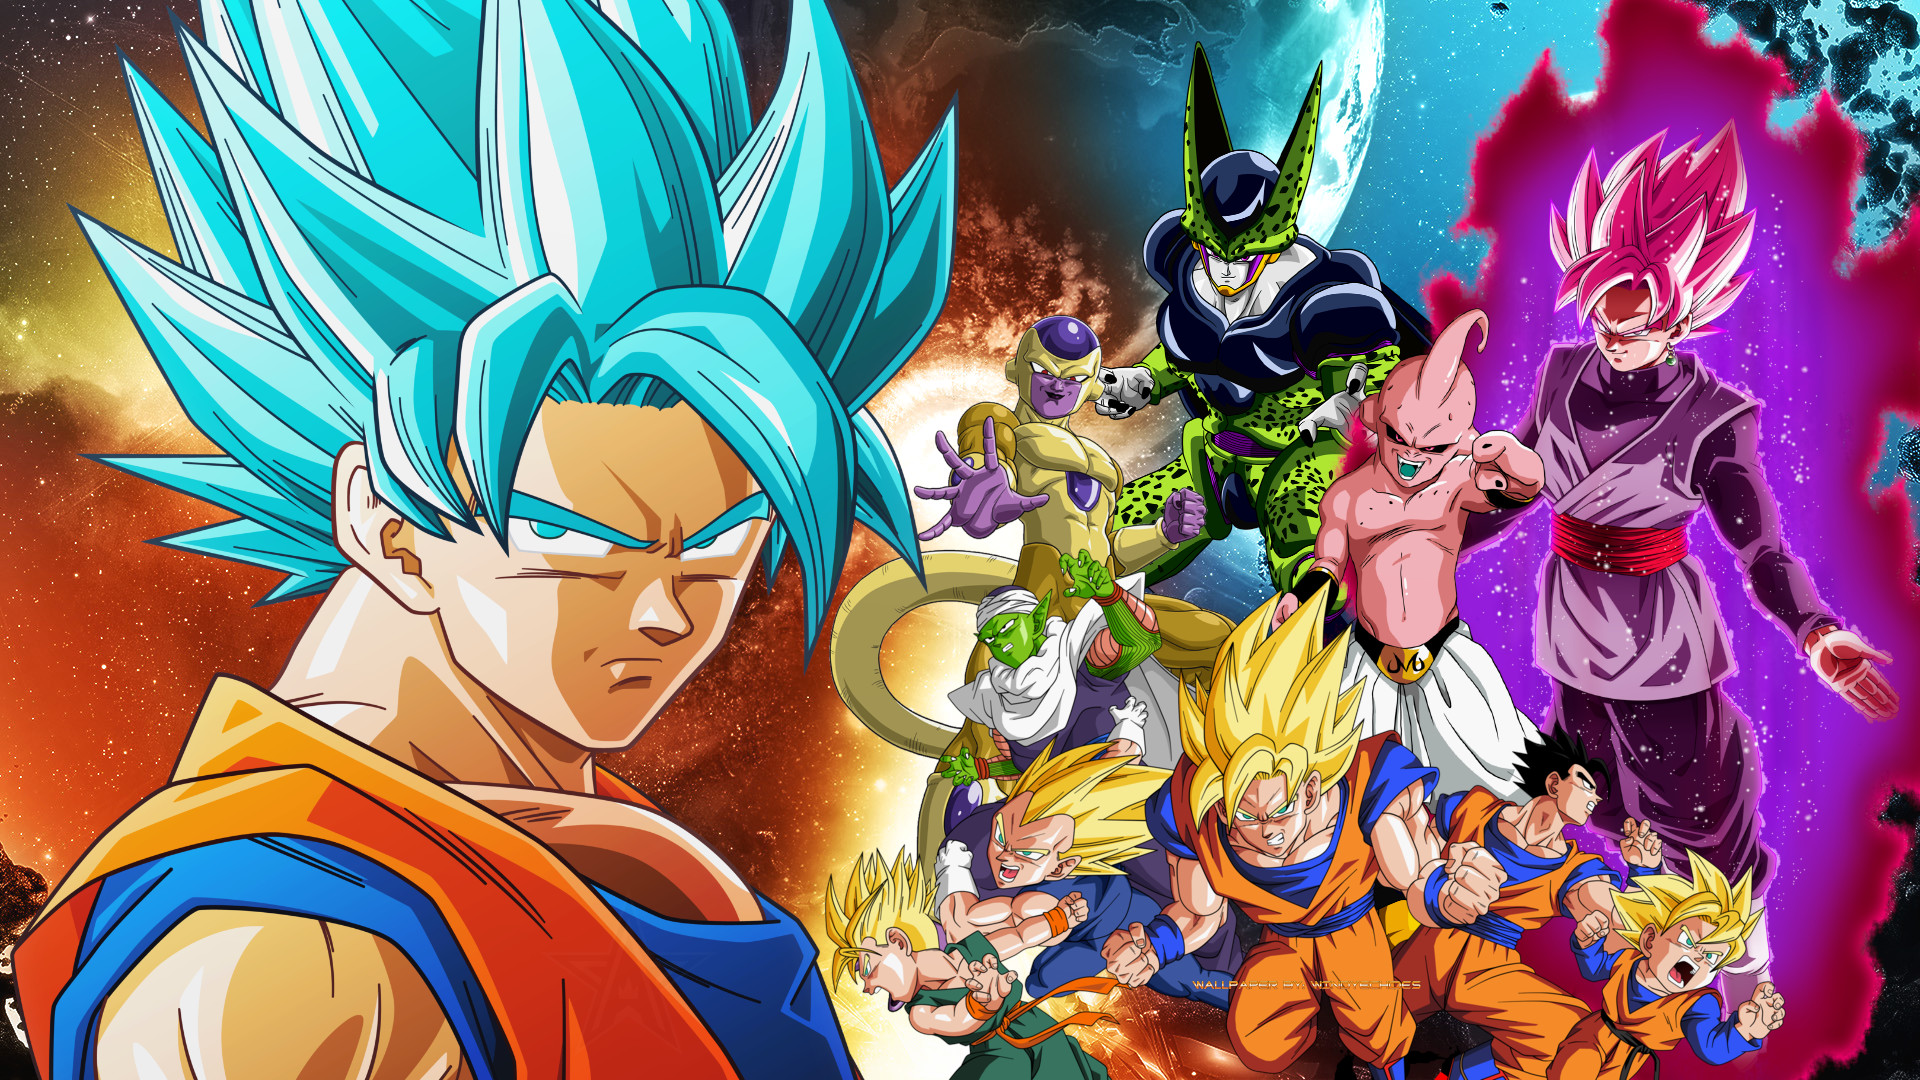 1920x1080 ... Dragon Ball Z And Dragon Ball Super Wallpaper by WindyEchoes